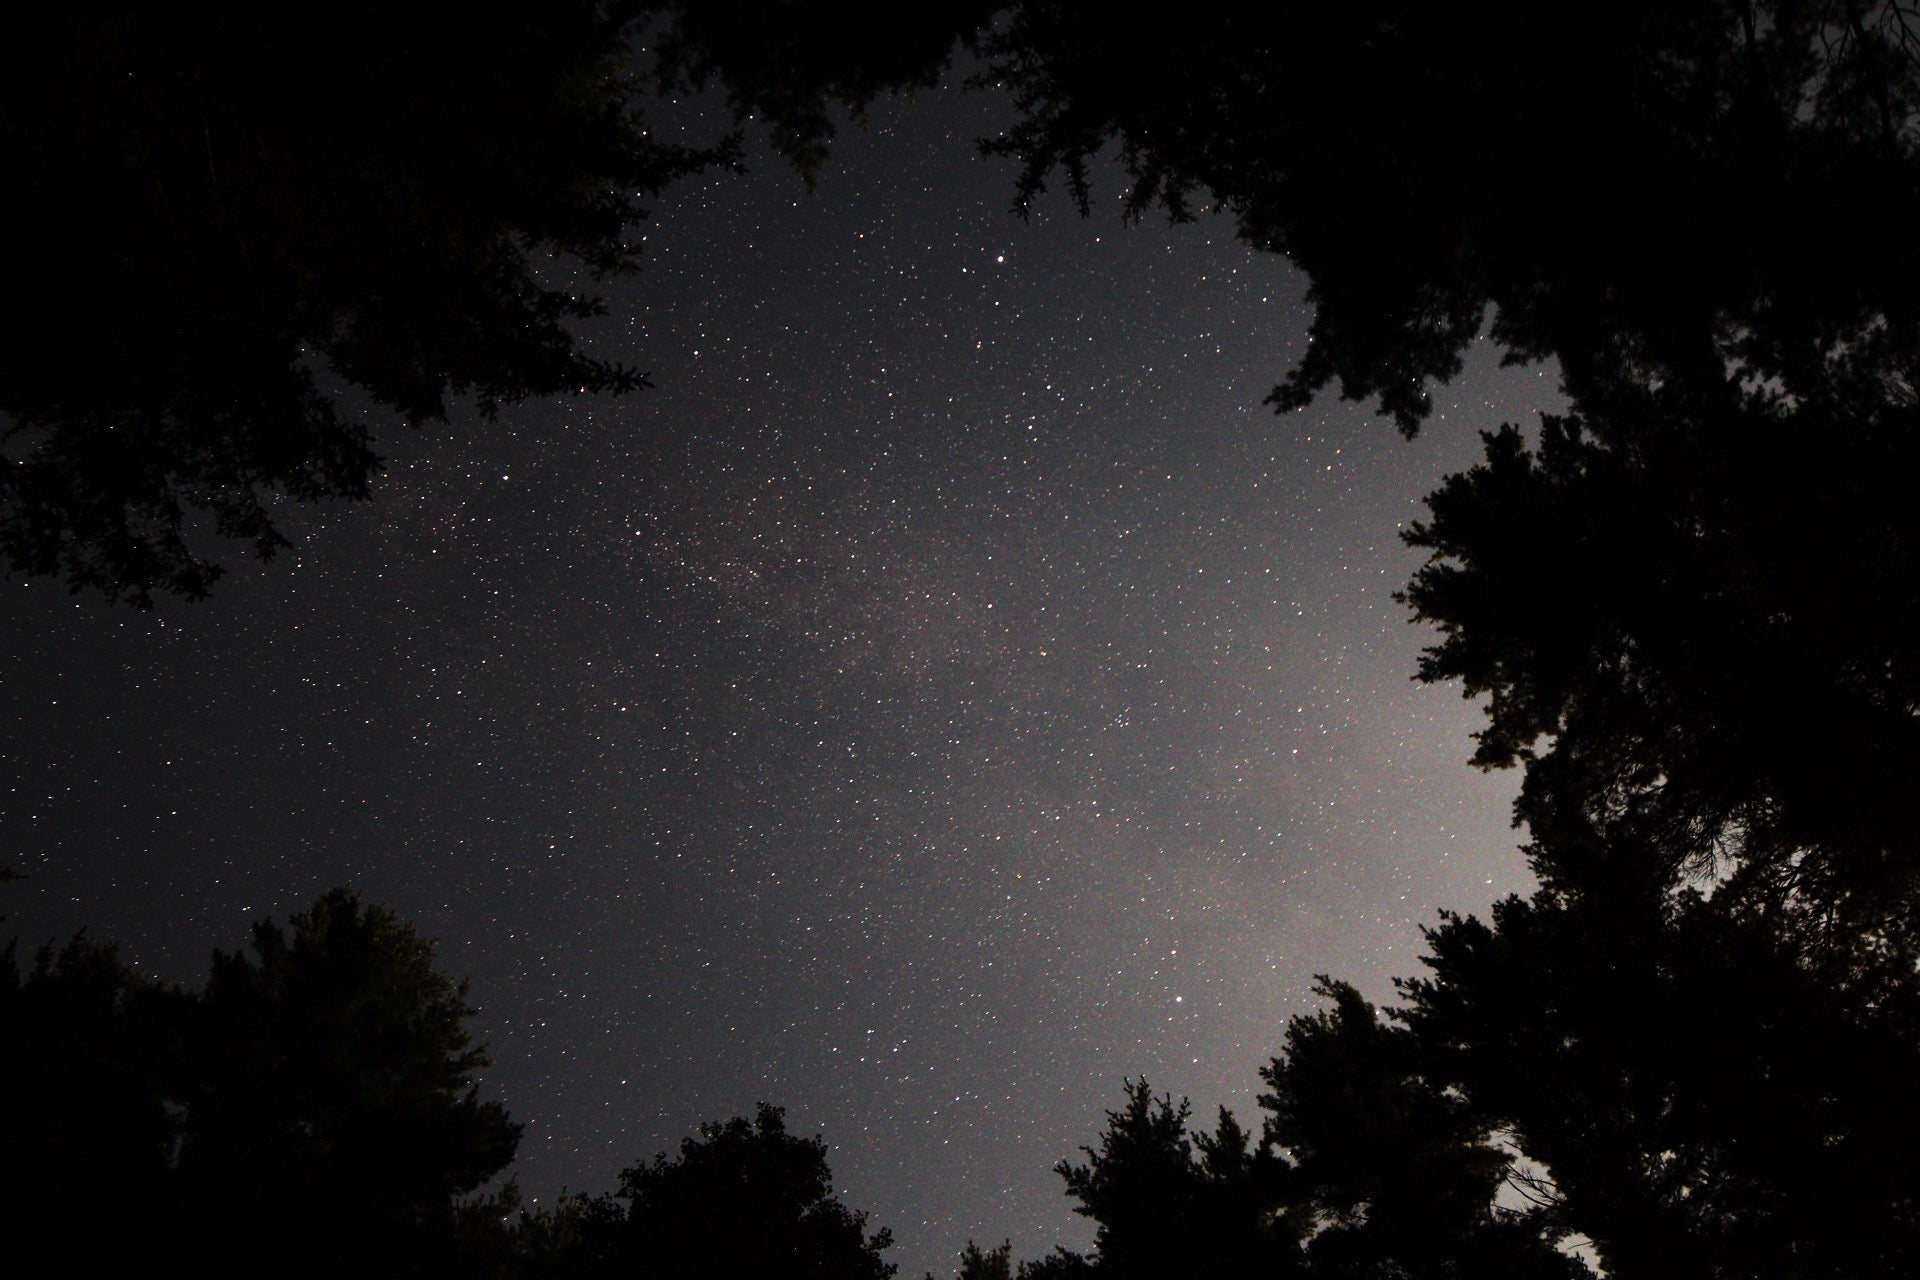 Milky Way from the campground